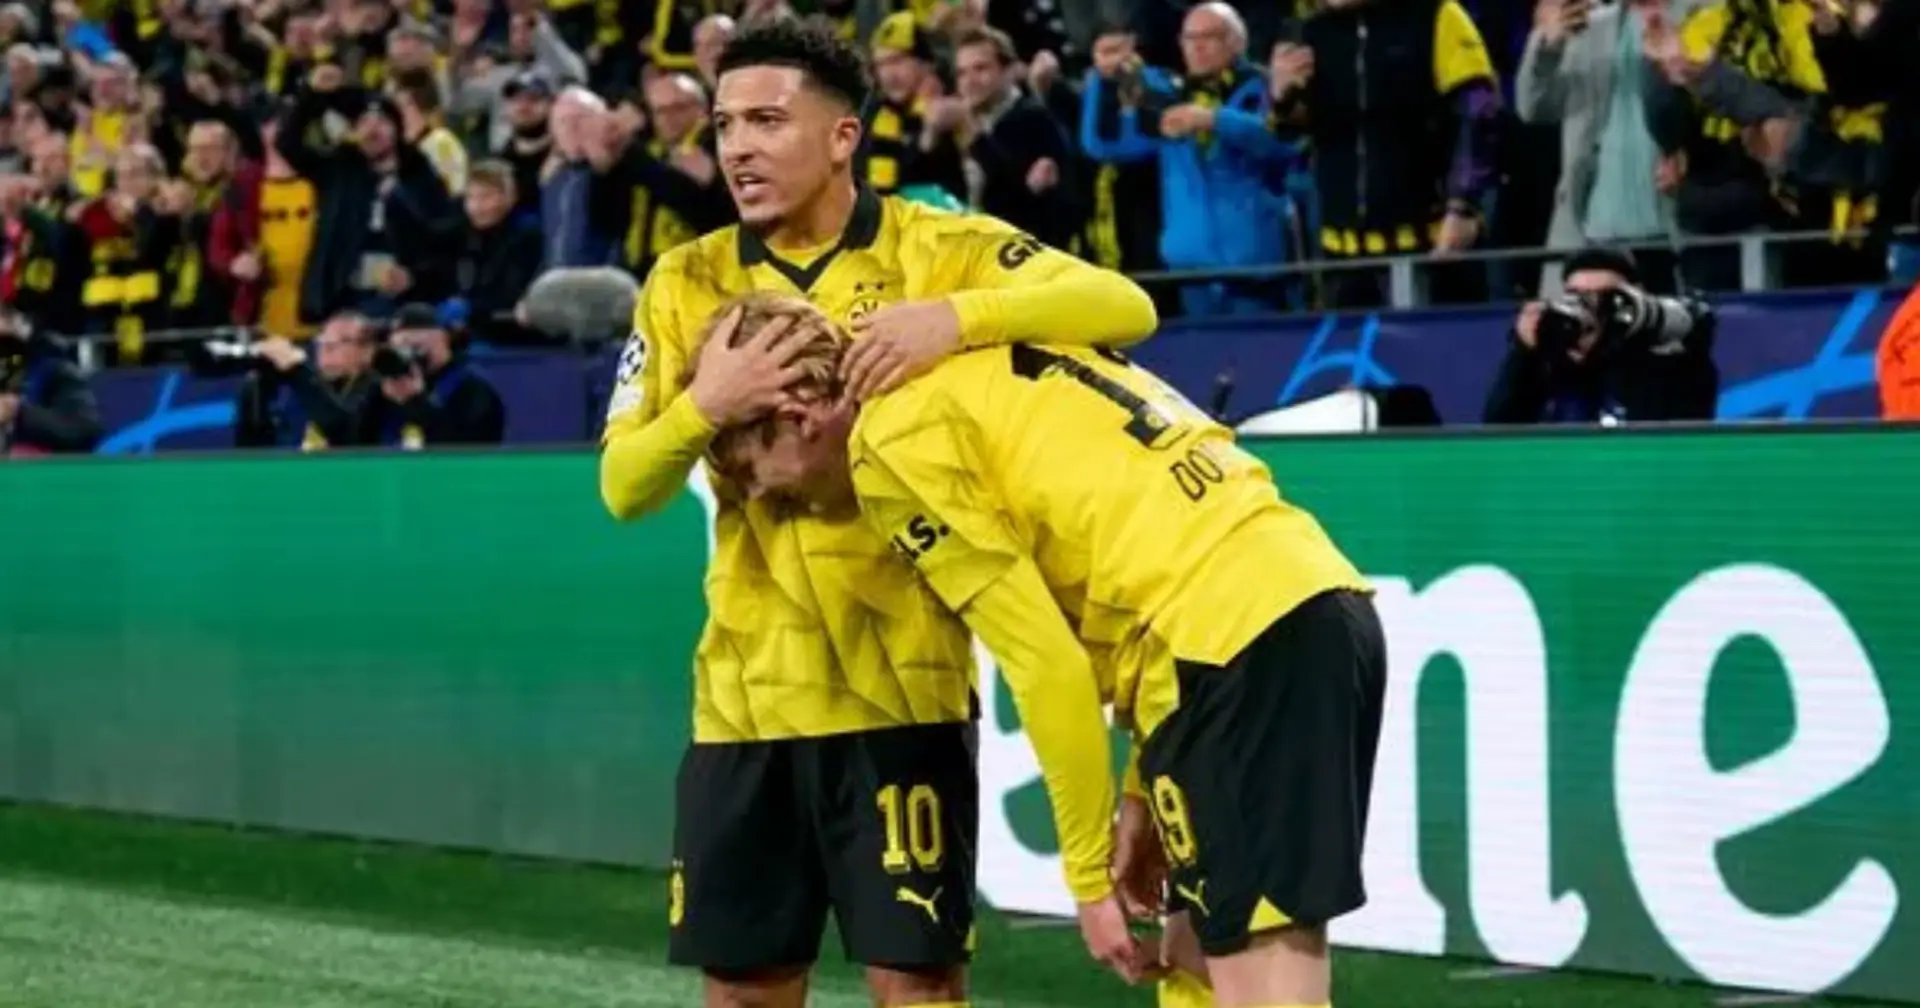 'Riding on the coat tails of his teammates': Man United fans play down Sancho's Champions League success